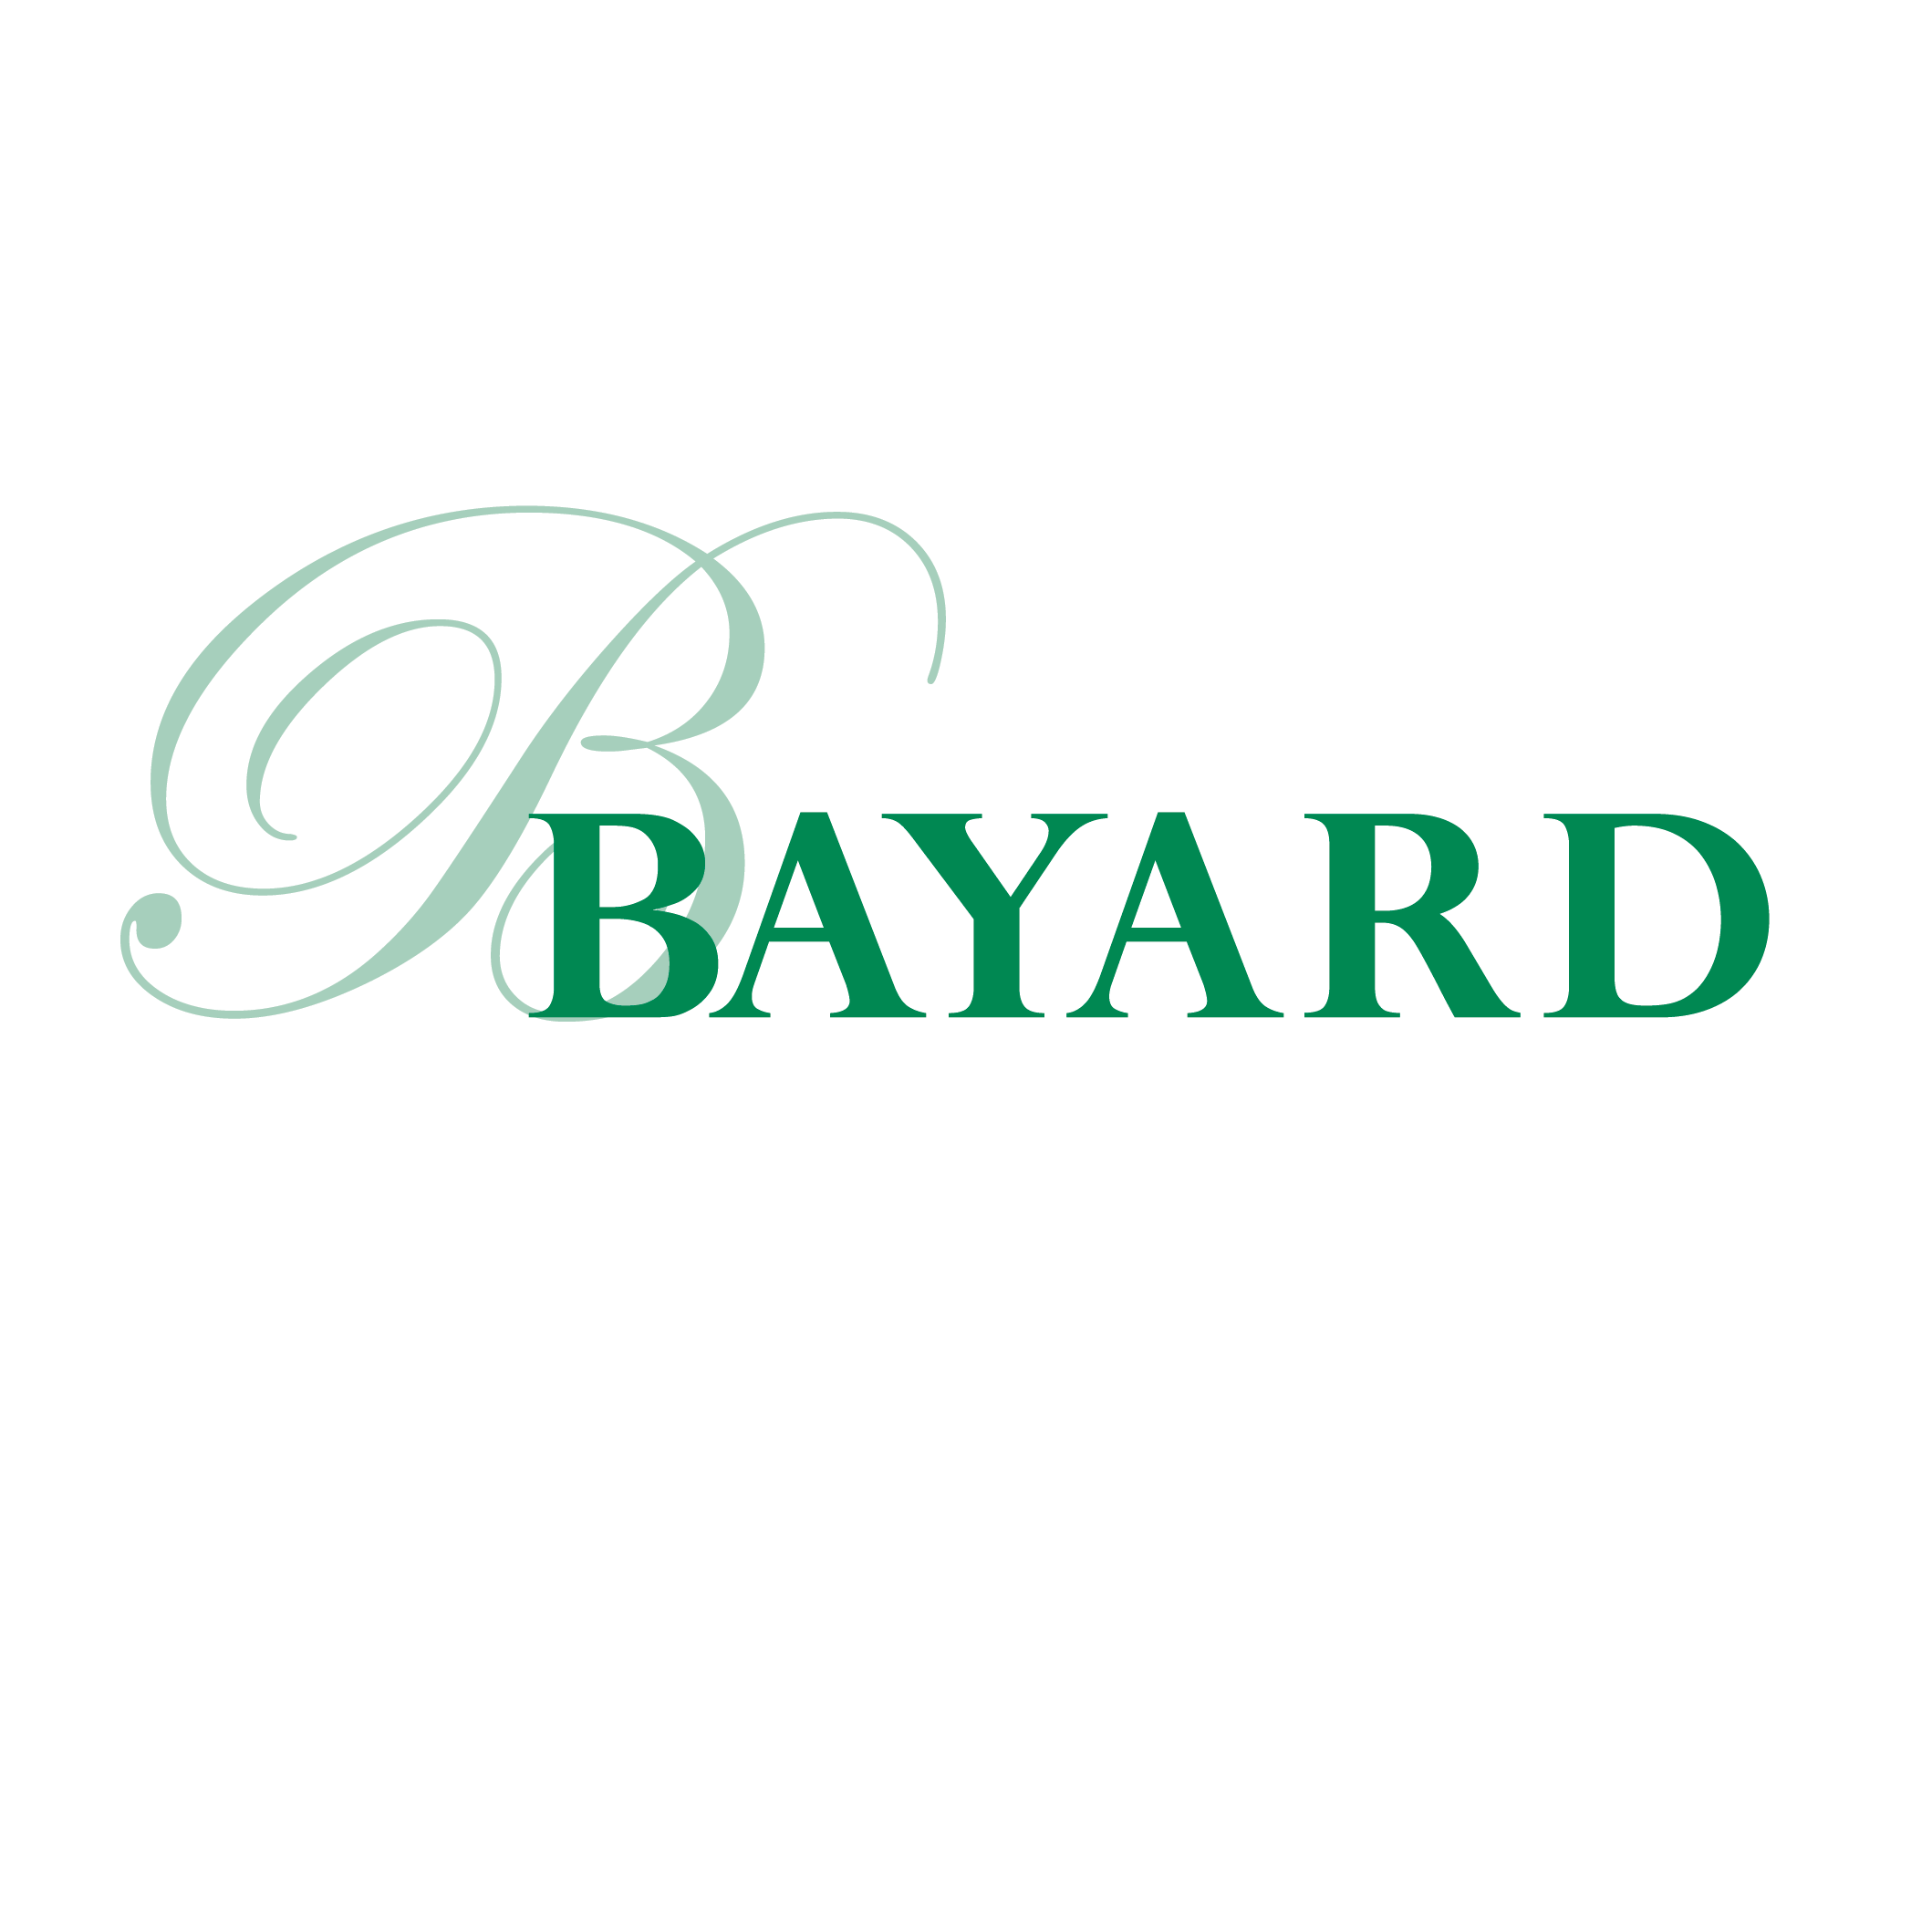 Bayard, P.A. is a commercial law firm based in Wilmington, Delaware.